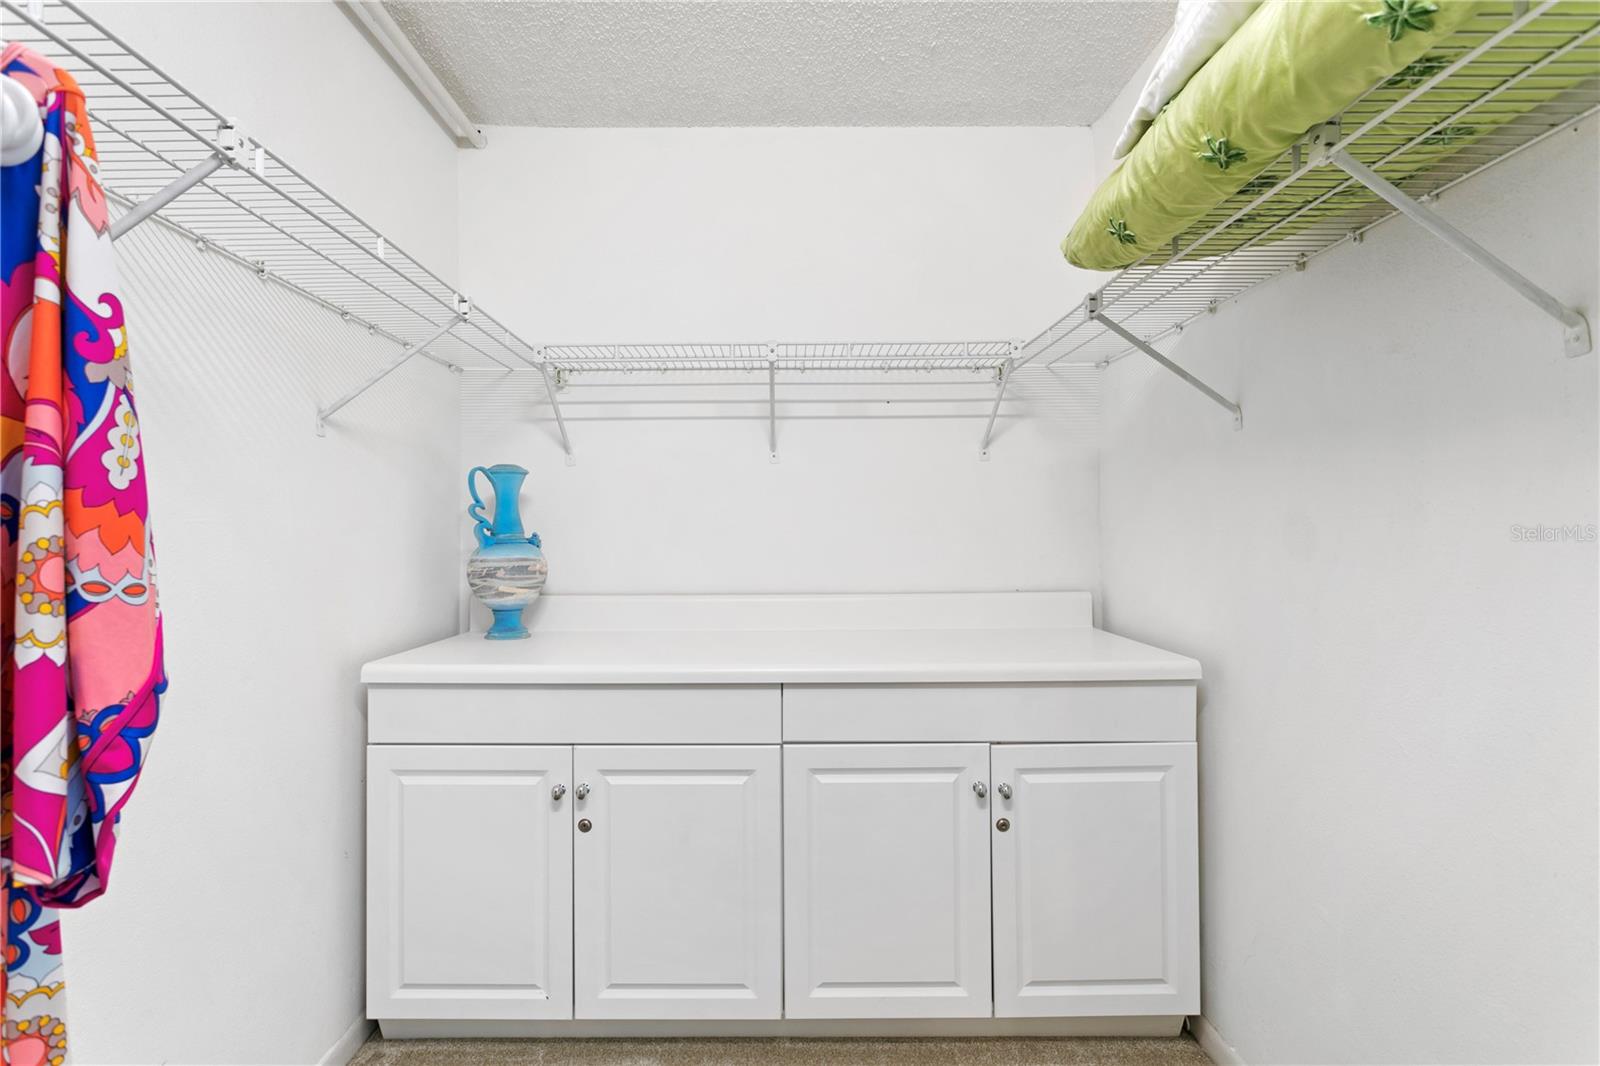 Primary closet with secure storage cabinet